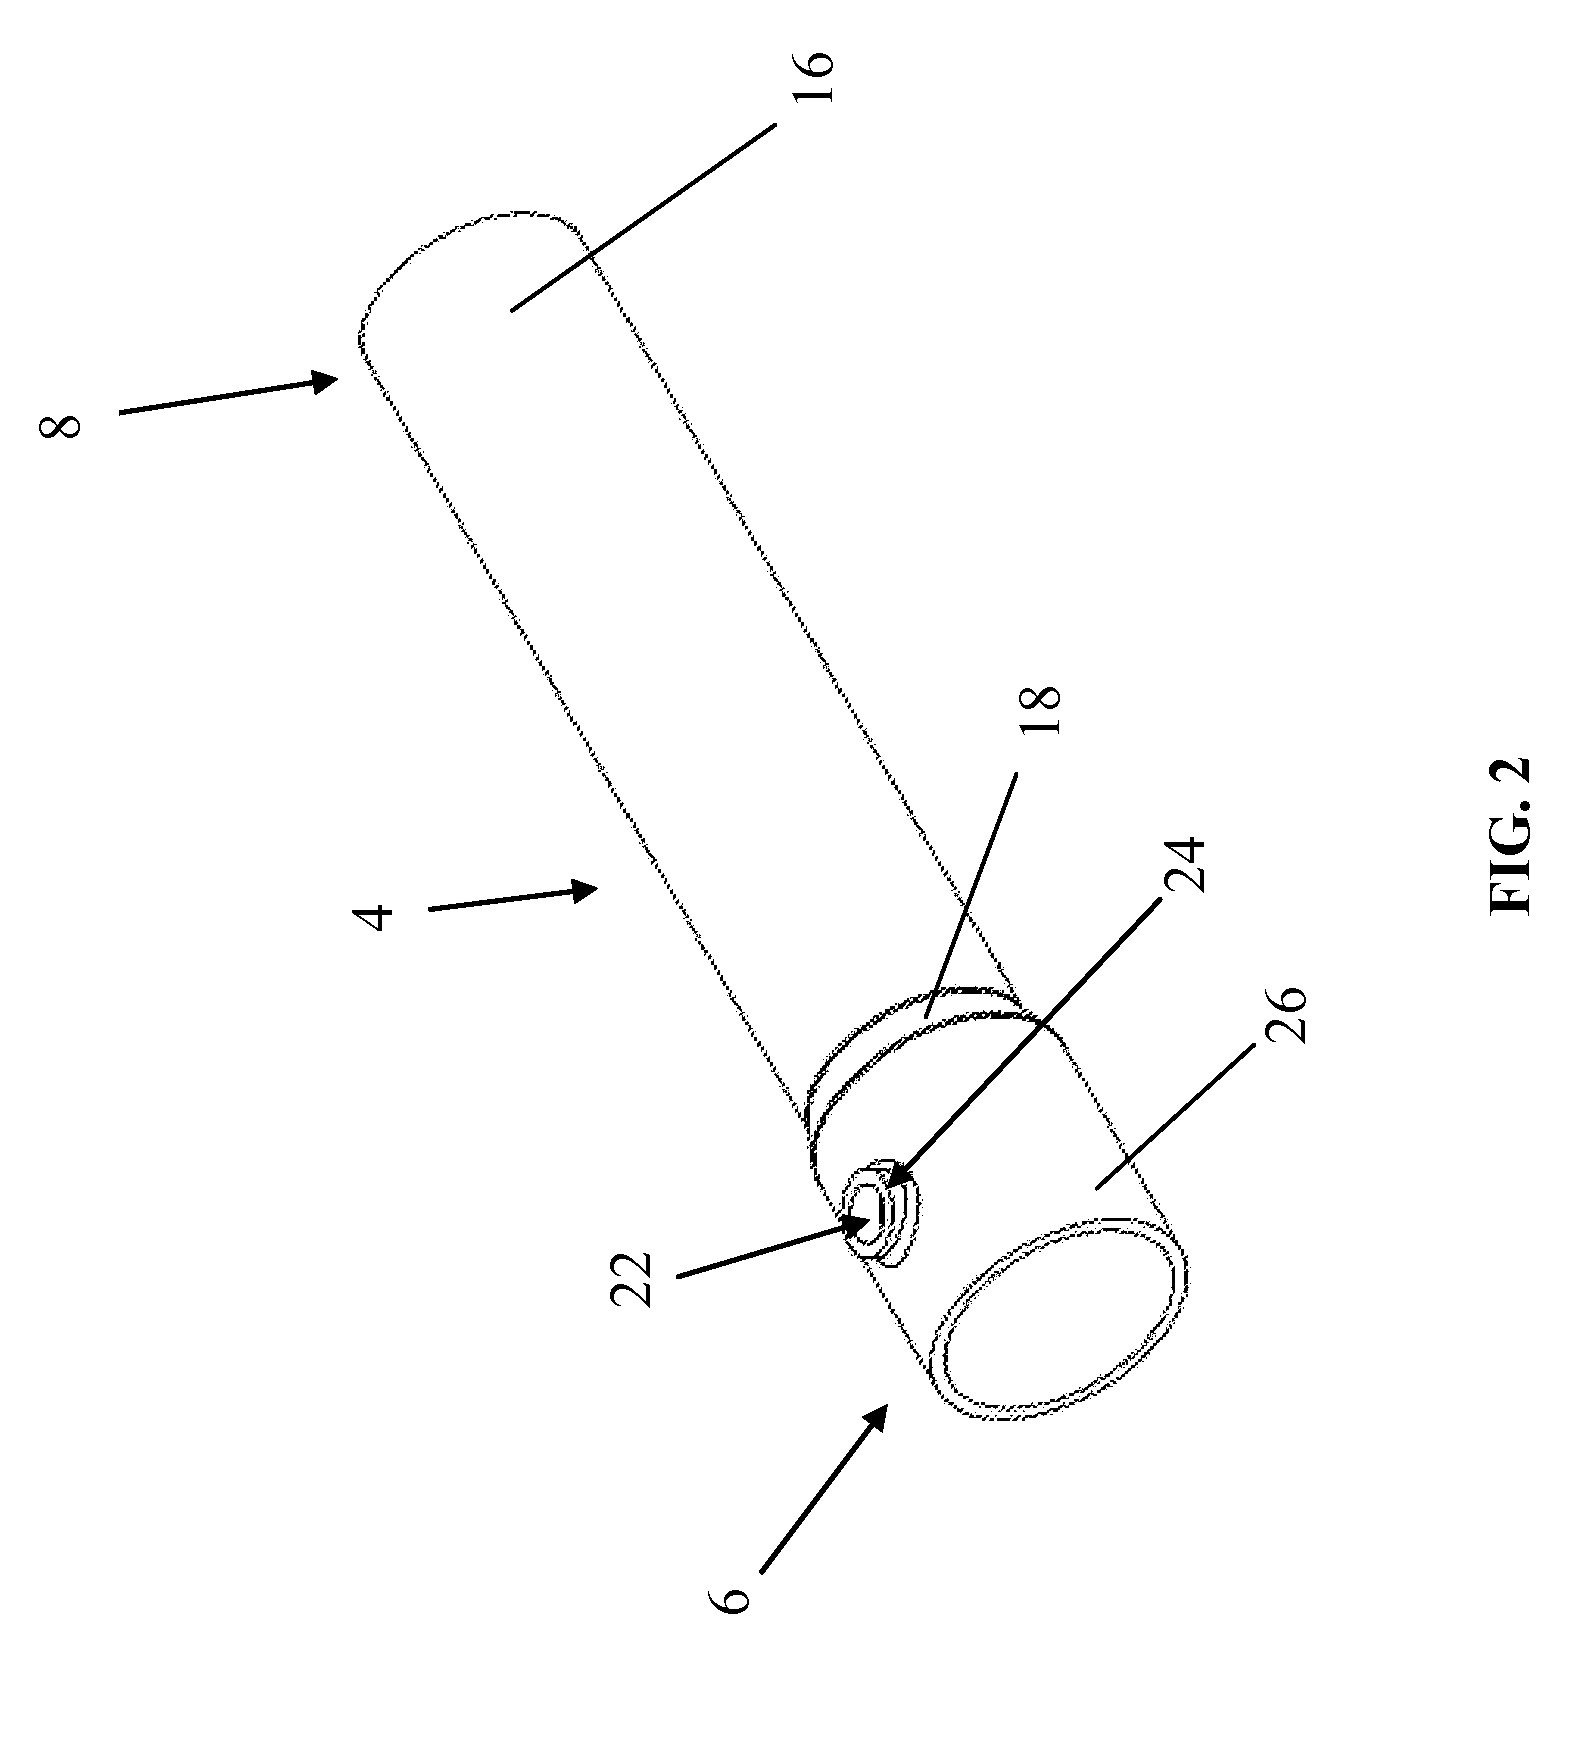 Integral coupling for joining conduit sections